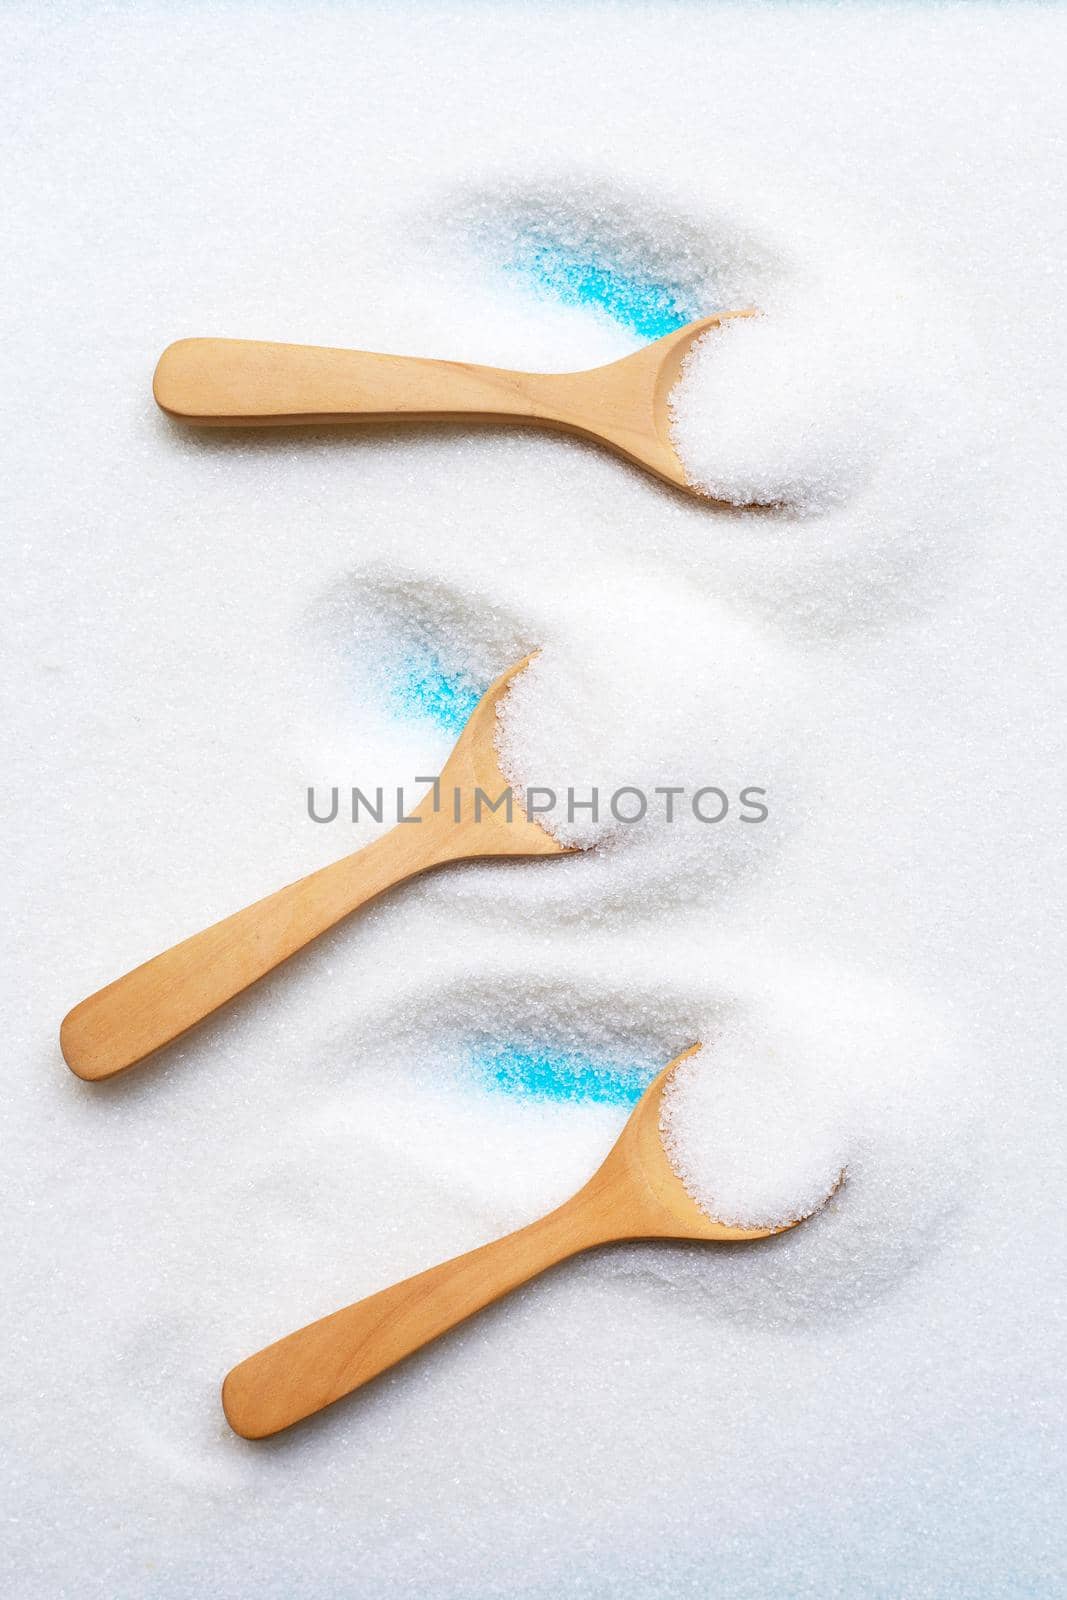 Wooden spoon with white granulated sugar. Top view